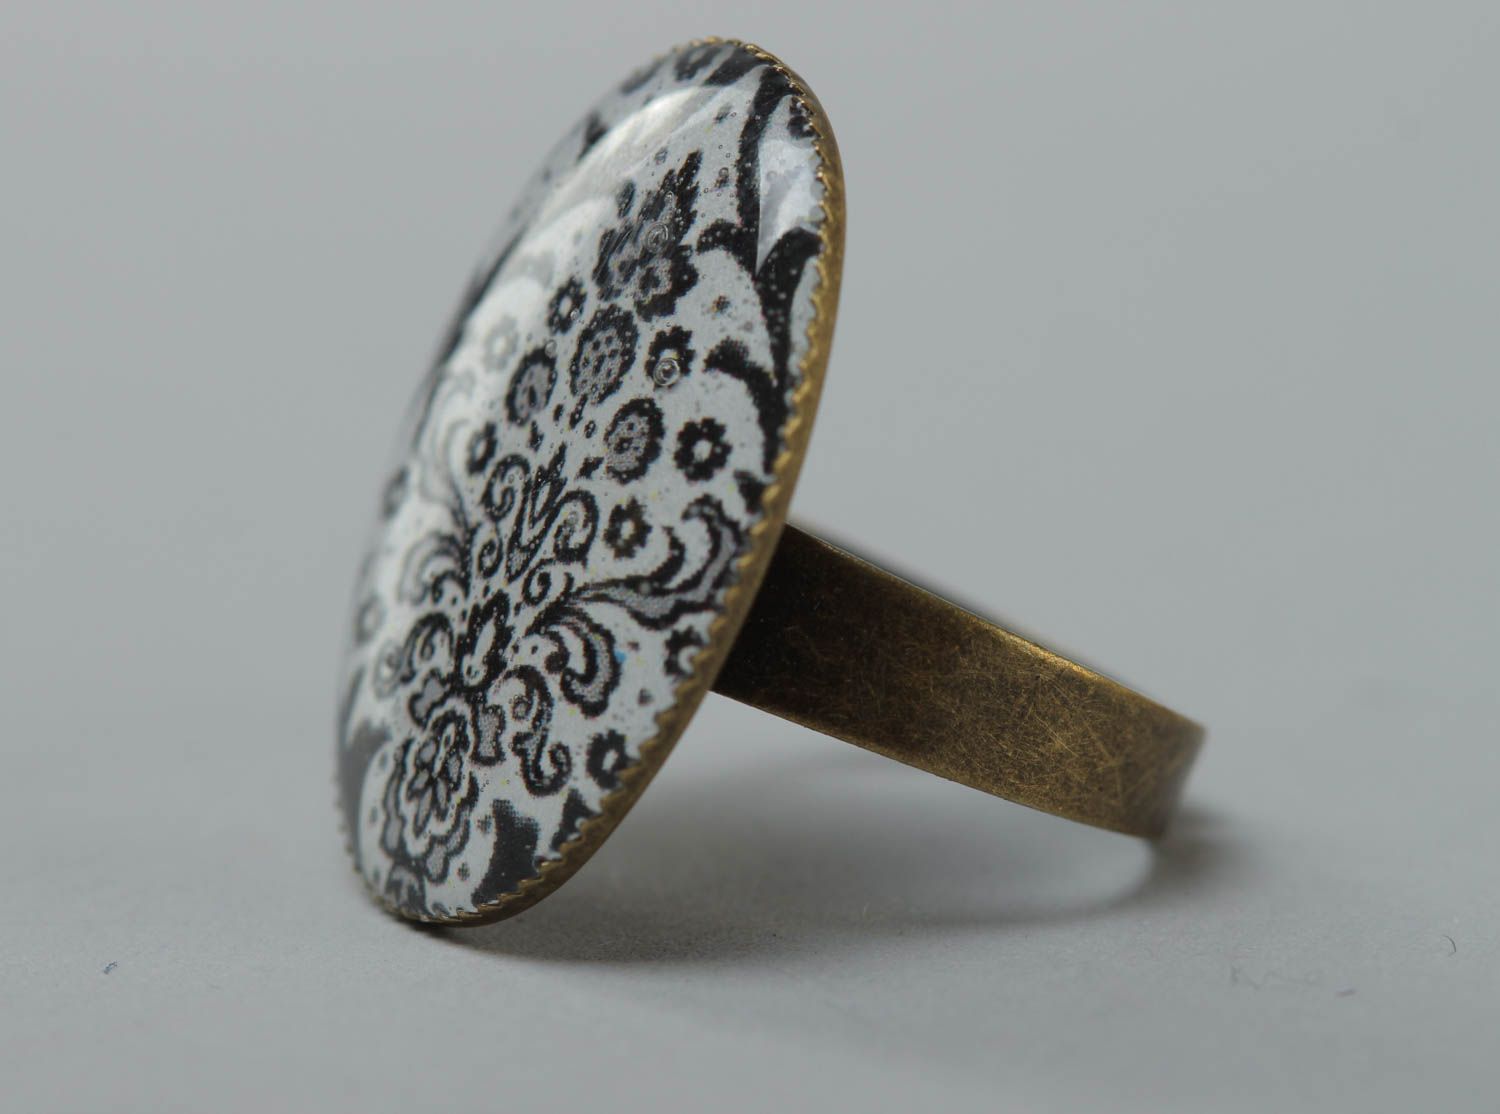 Handmade oval glass glaze ring with metal basis and black and white pattern photo 2